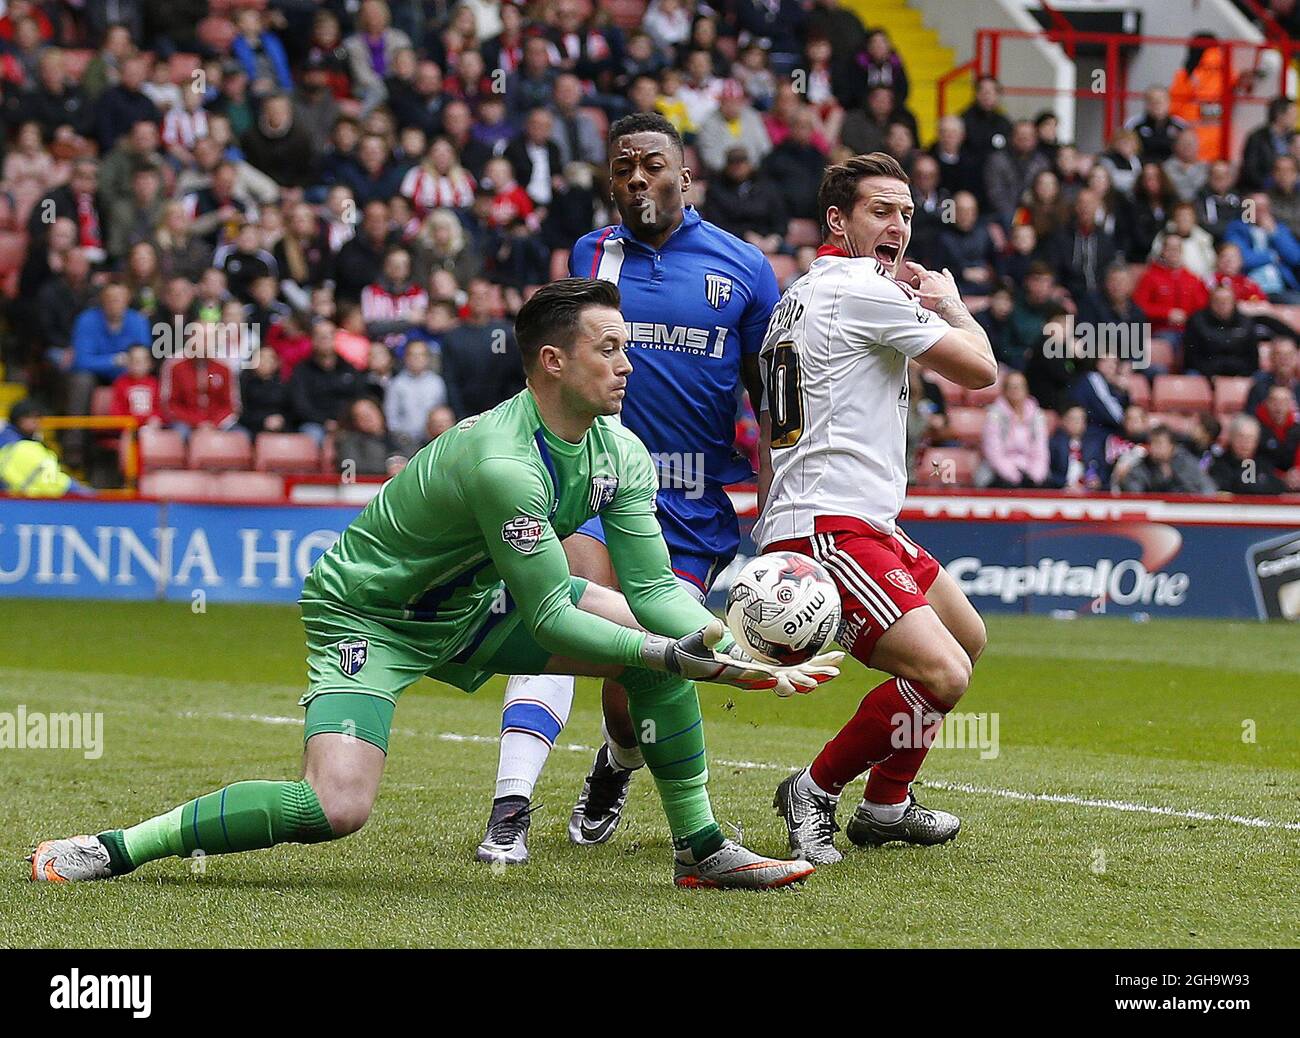 Stuart Nelson of Gillingham collects the ball as Billy Sharp of Sheffield Utd closes in during the Sky Bet League One match at The Bramall Lane Stadium.  Photo credit should read: Simon Bellis/Sportimage via PA Images Stock Photo